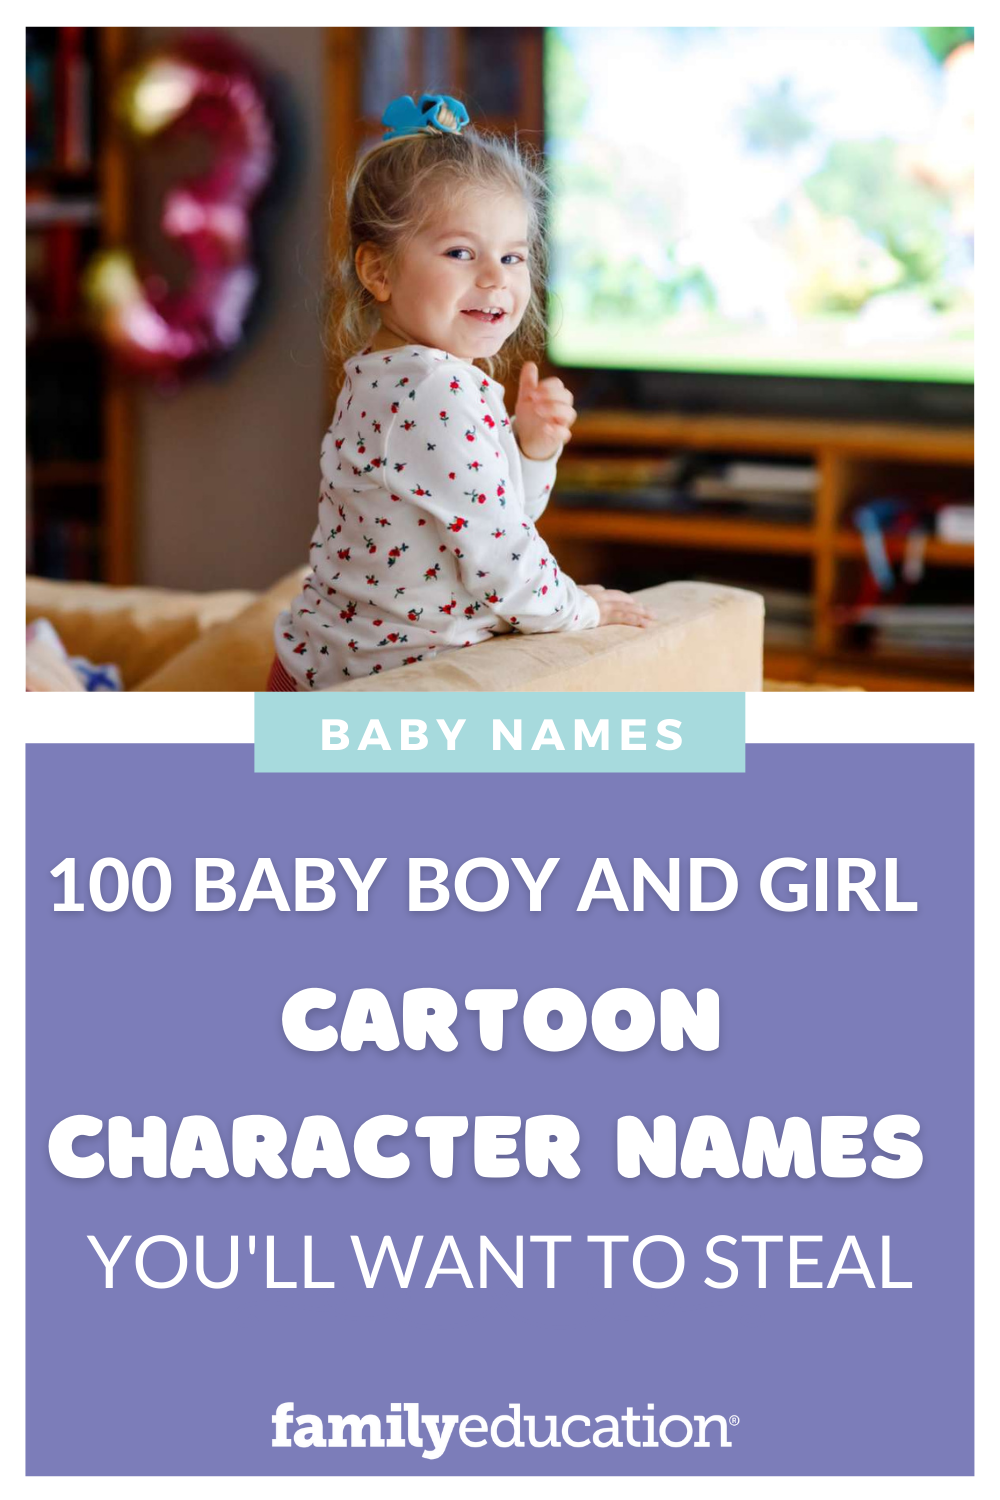 100 Baby Boy and Girl Cartoon Character Names You'll Want to Steal -  FamilyEducation